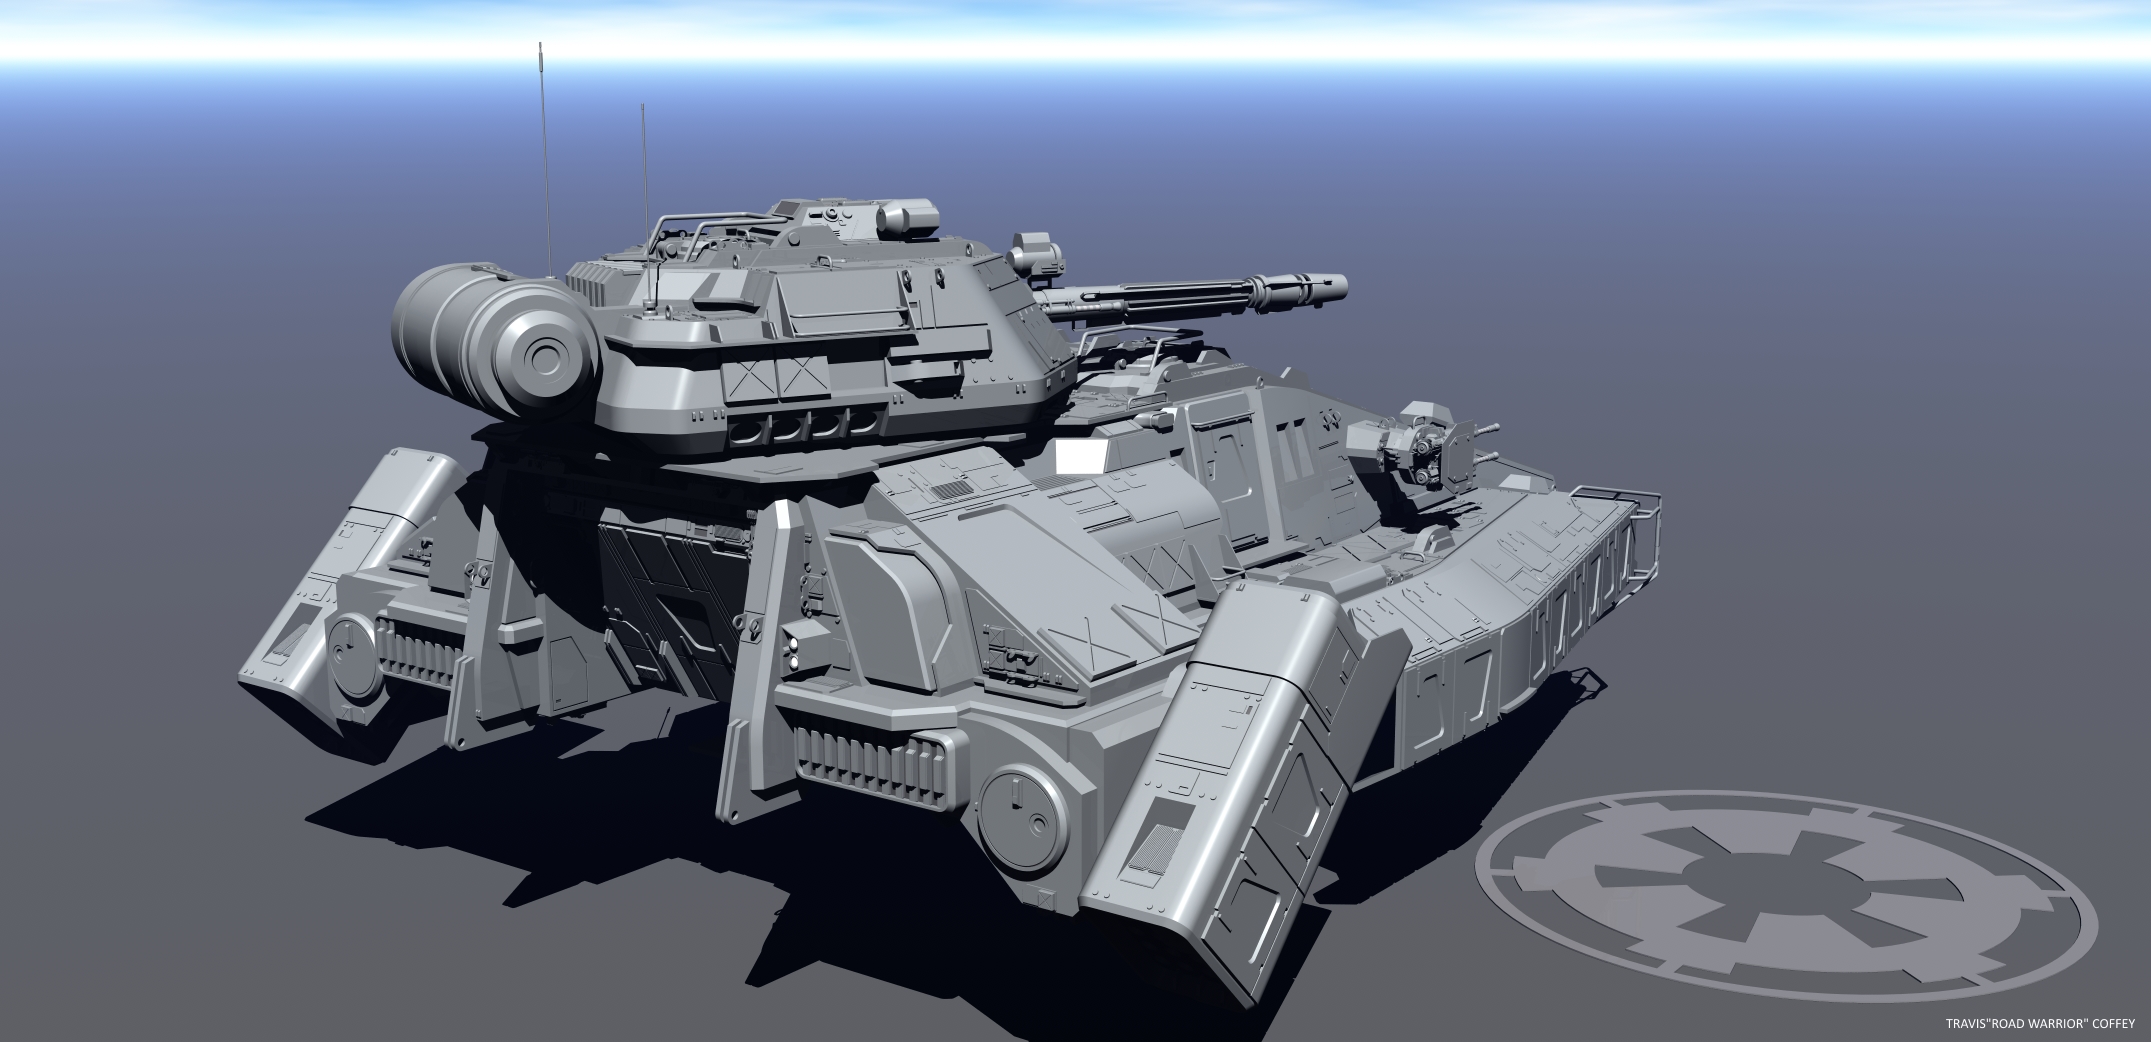 Imperial Hover Tank Final Stage 2 By Roadwarriorz44 On Deviantart